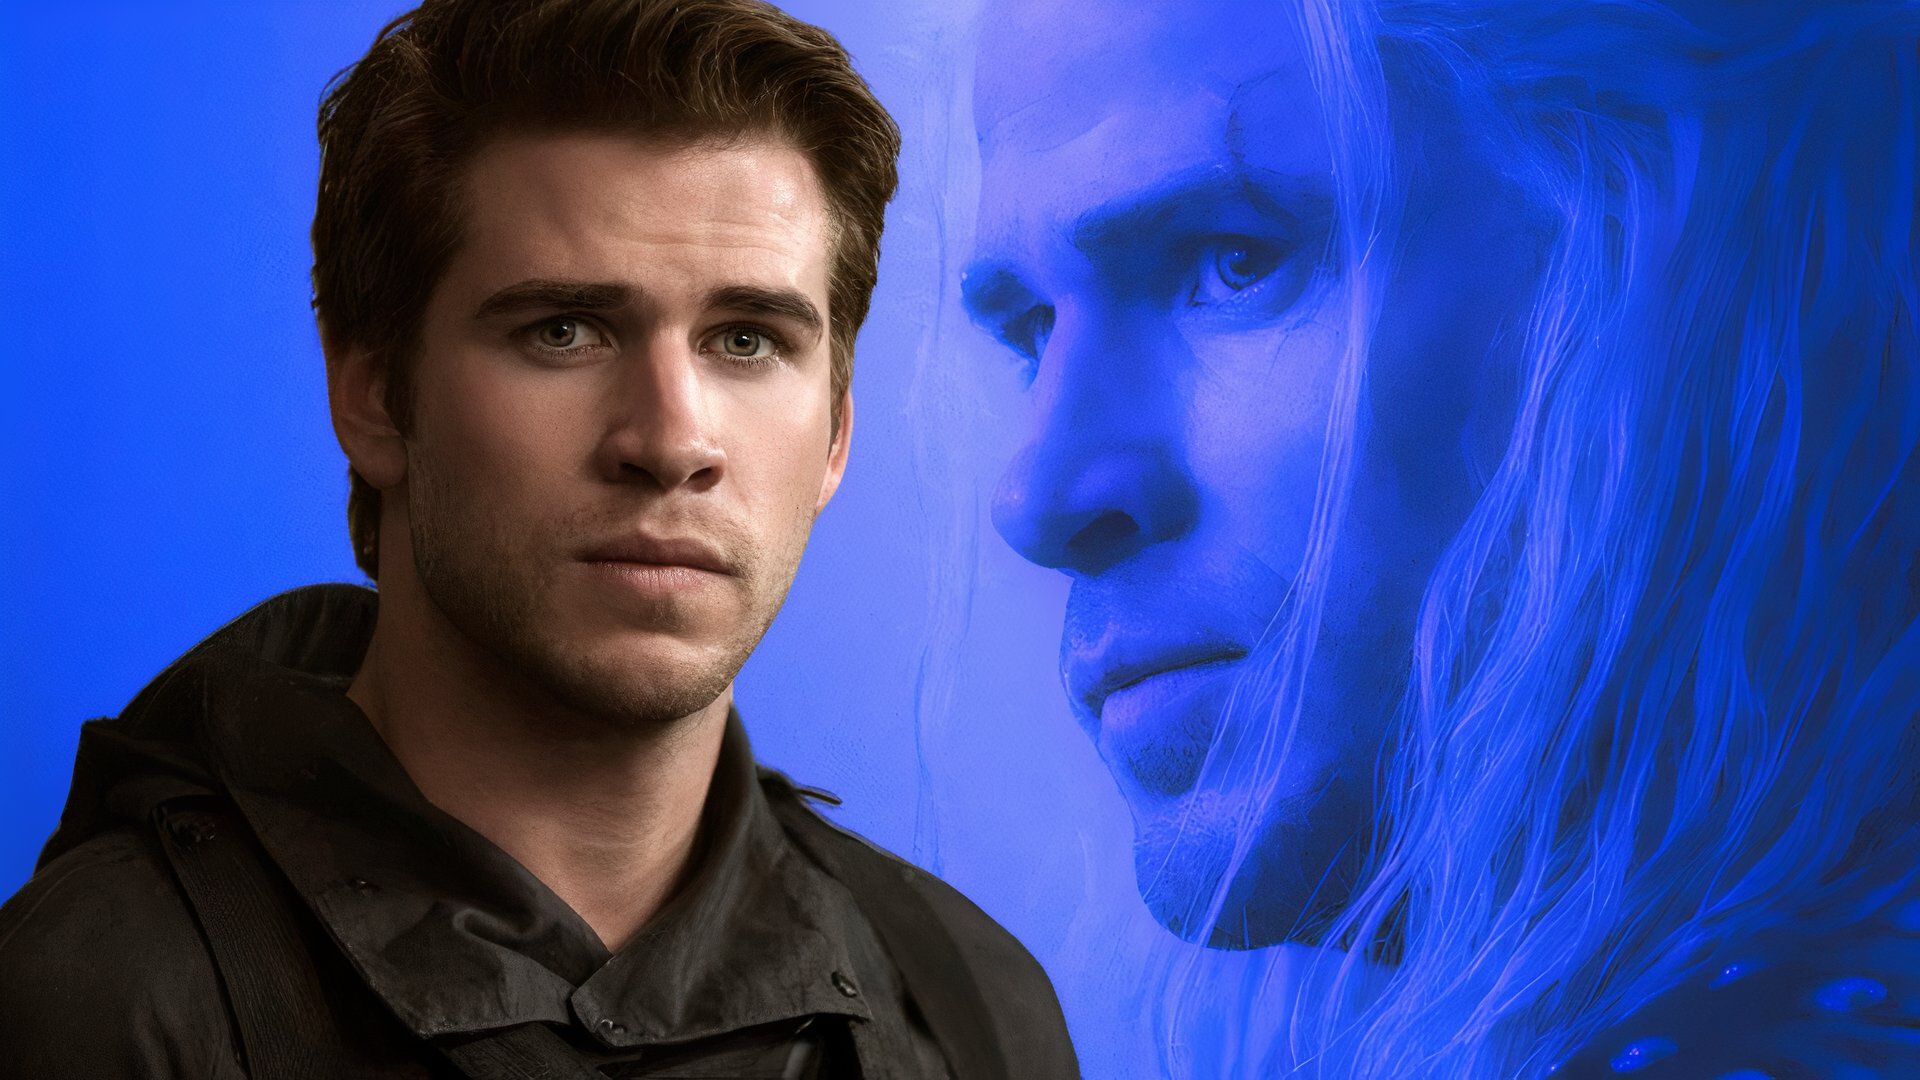 Liam Hemsworth in The Hunger Games and as Geralt.